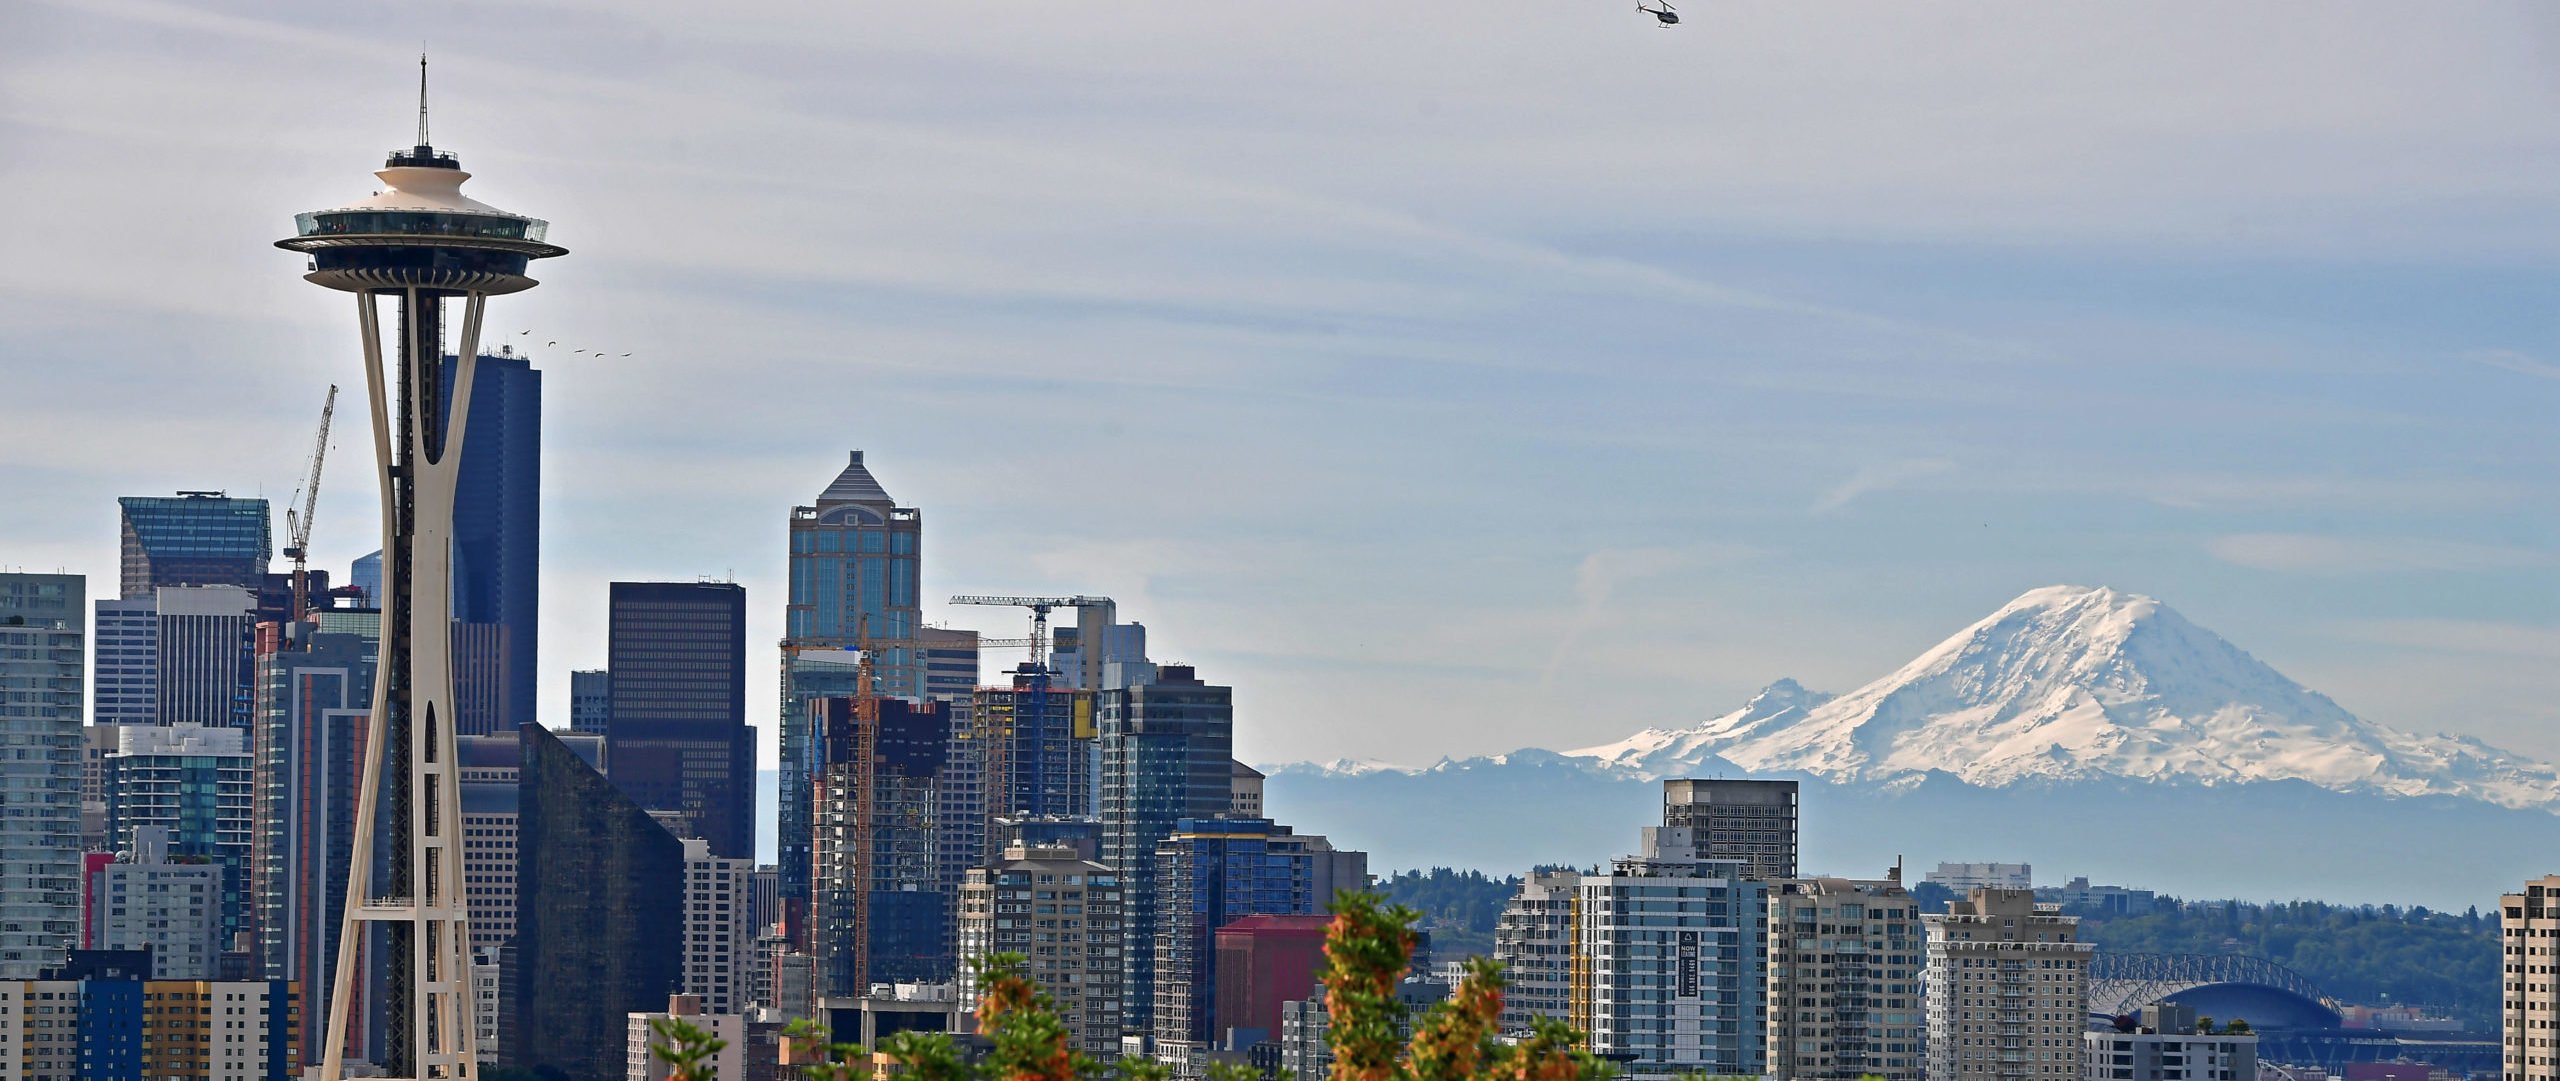 SEATTLE, WA - JUNE 9: A general view of the Seattle Skyline and Mount Rainier from Kerry Park during the 2019 Rock'n'Roll Seattle Marathon and 1/2 Marathon on June 9, 2019 in Seattle, Washington. 